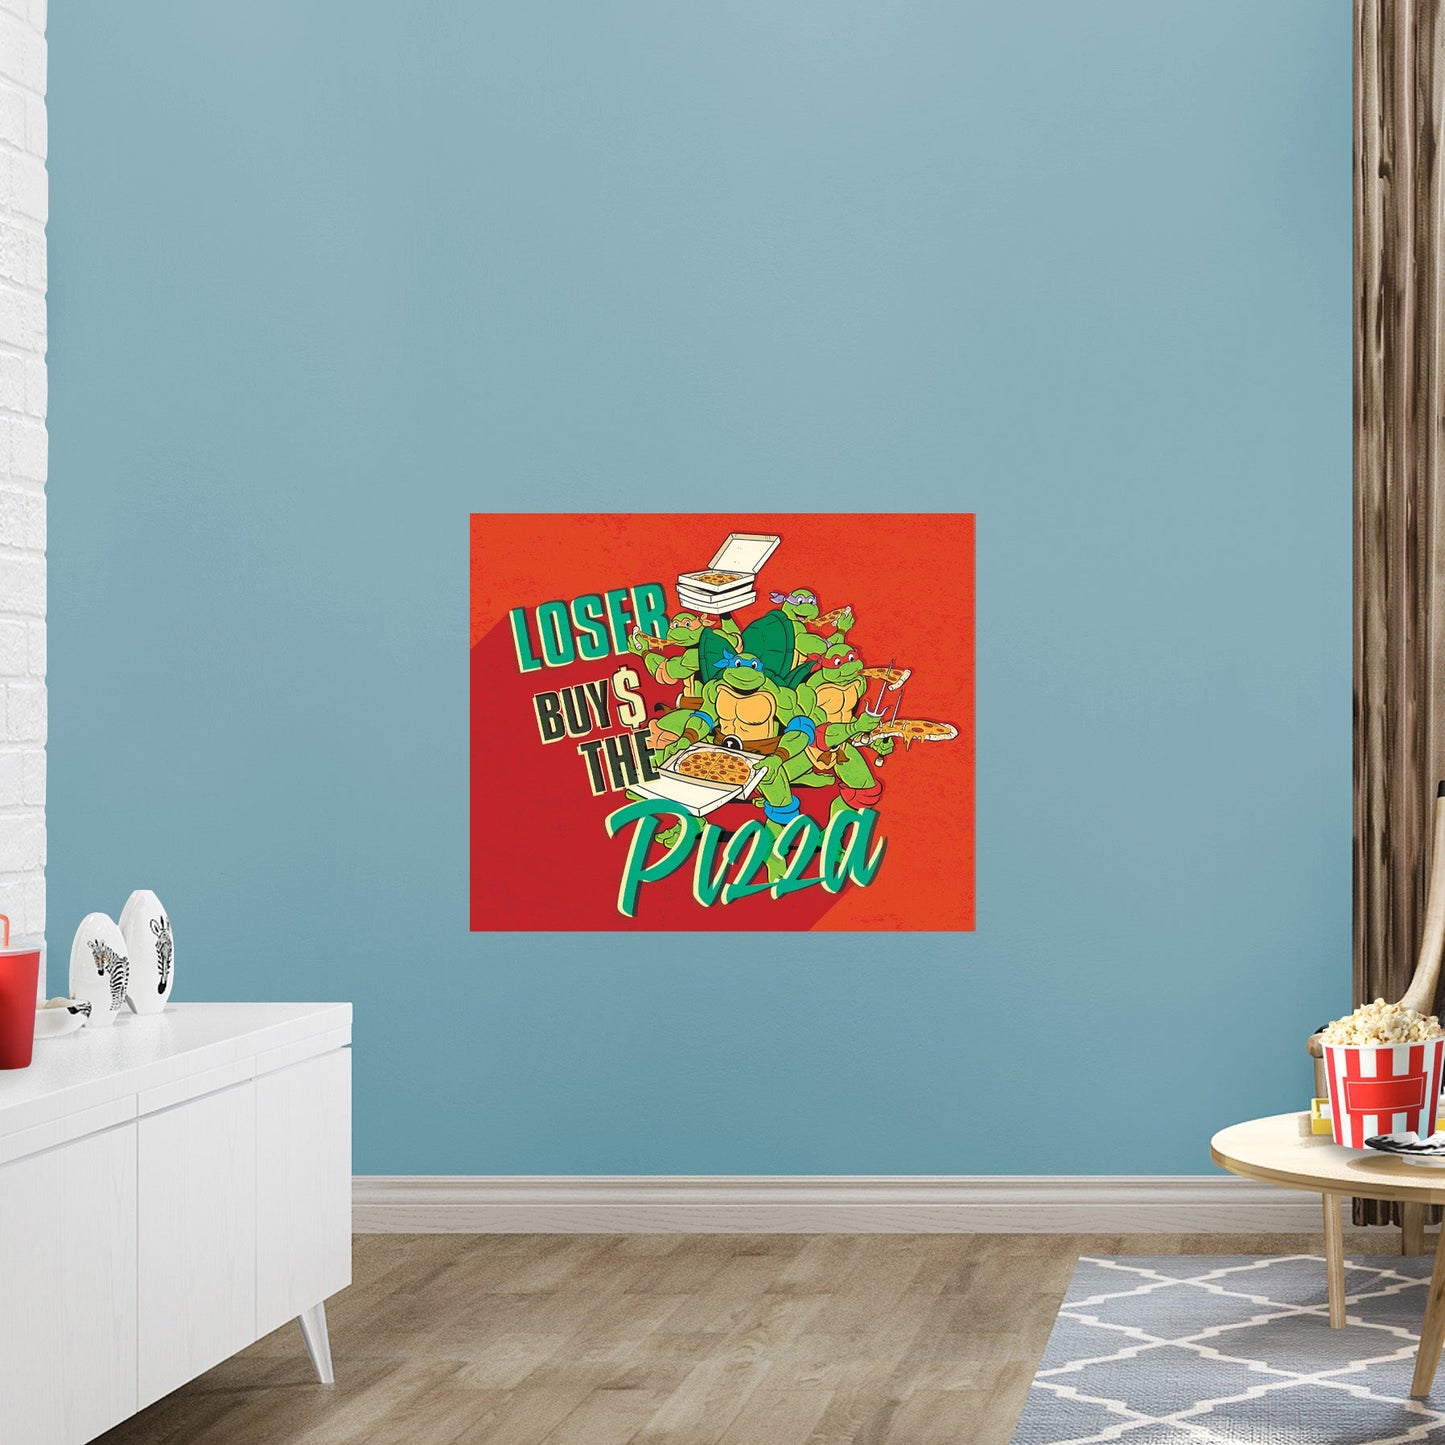 Teenage Mutant Ninja Turtles: Loser Buys Poster - Officially Licensed Nickelodeon Removable Adhesive Decal